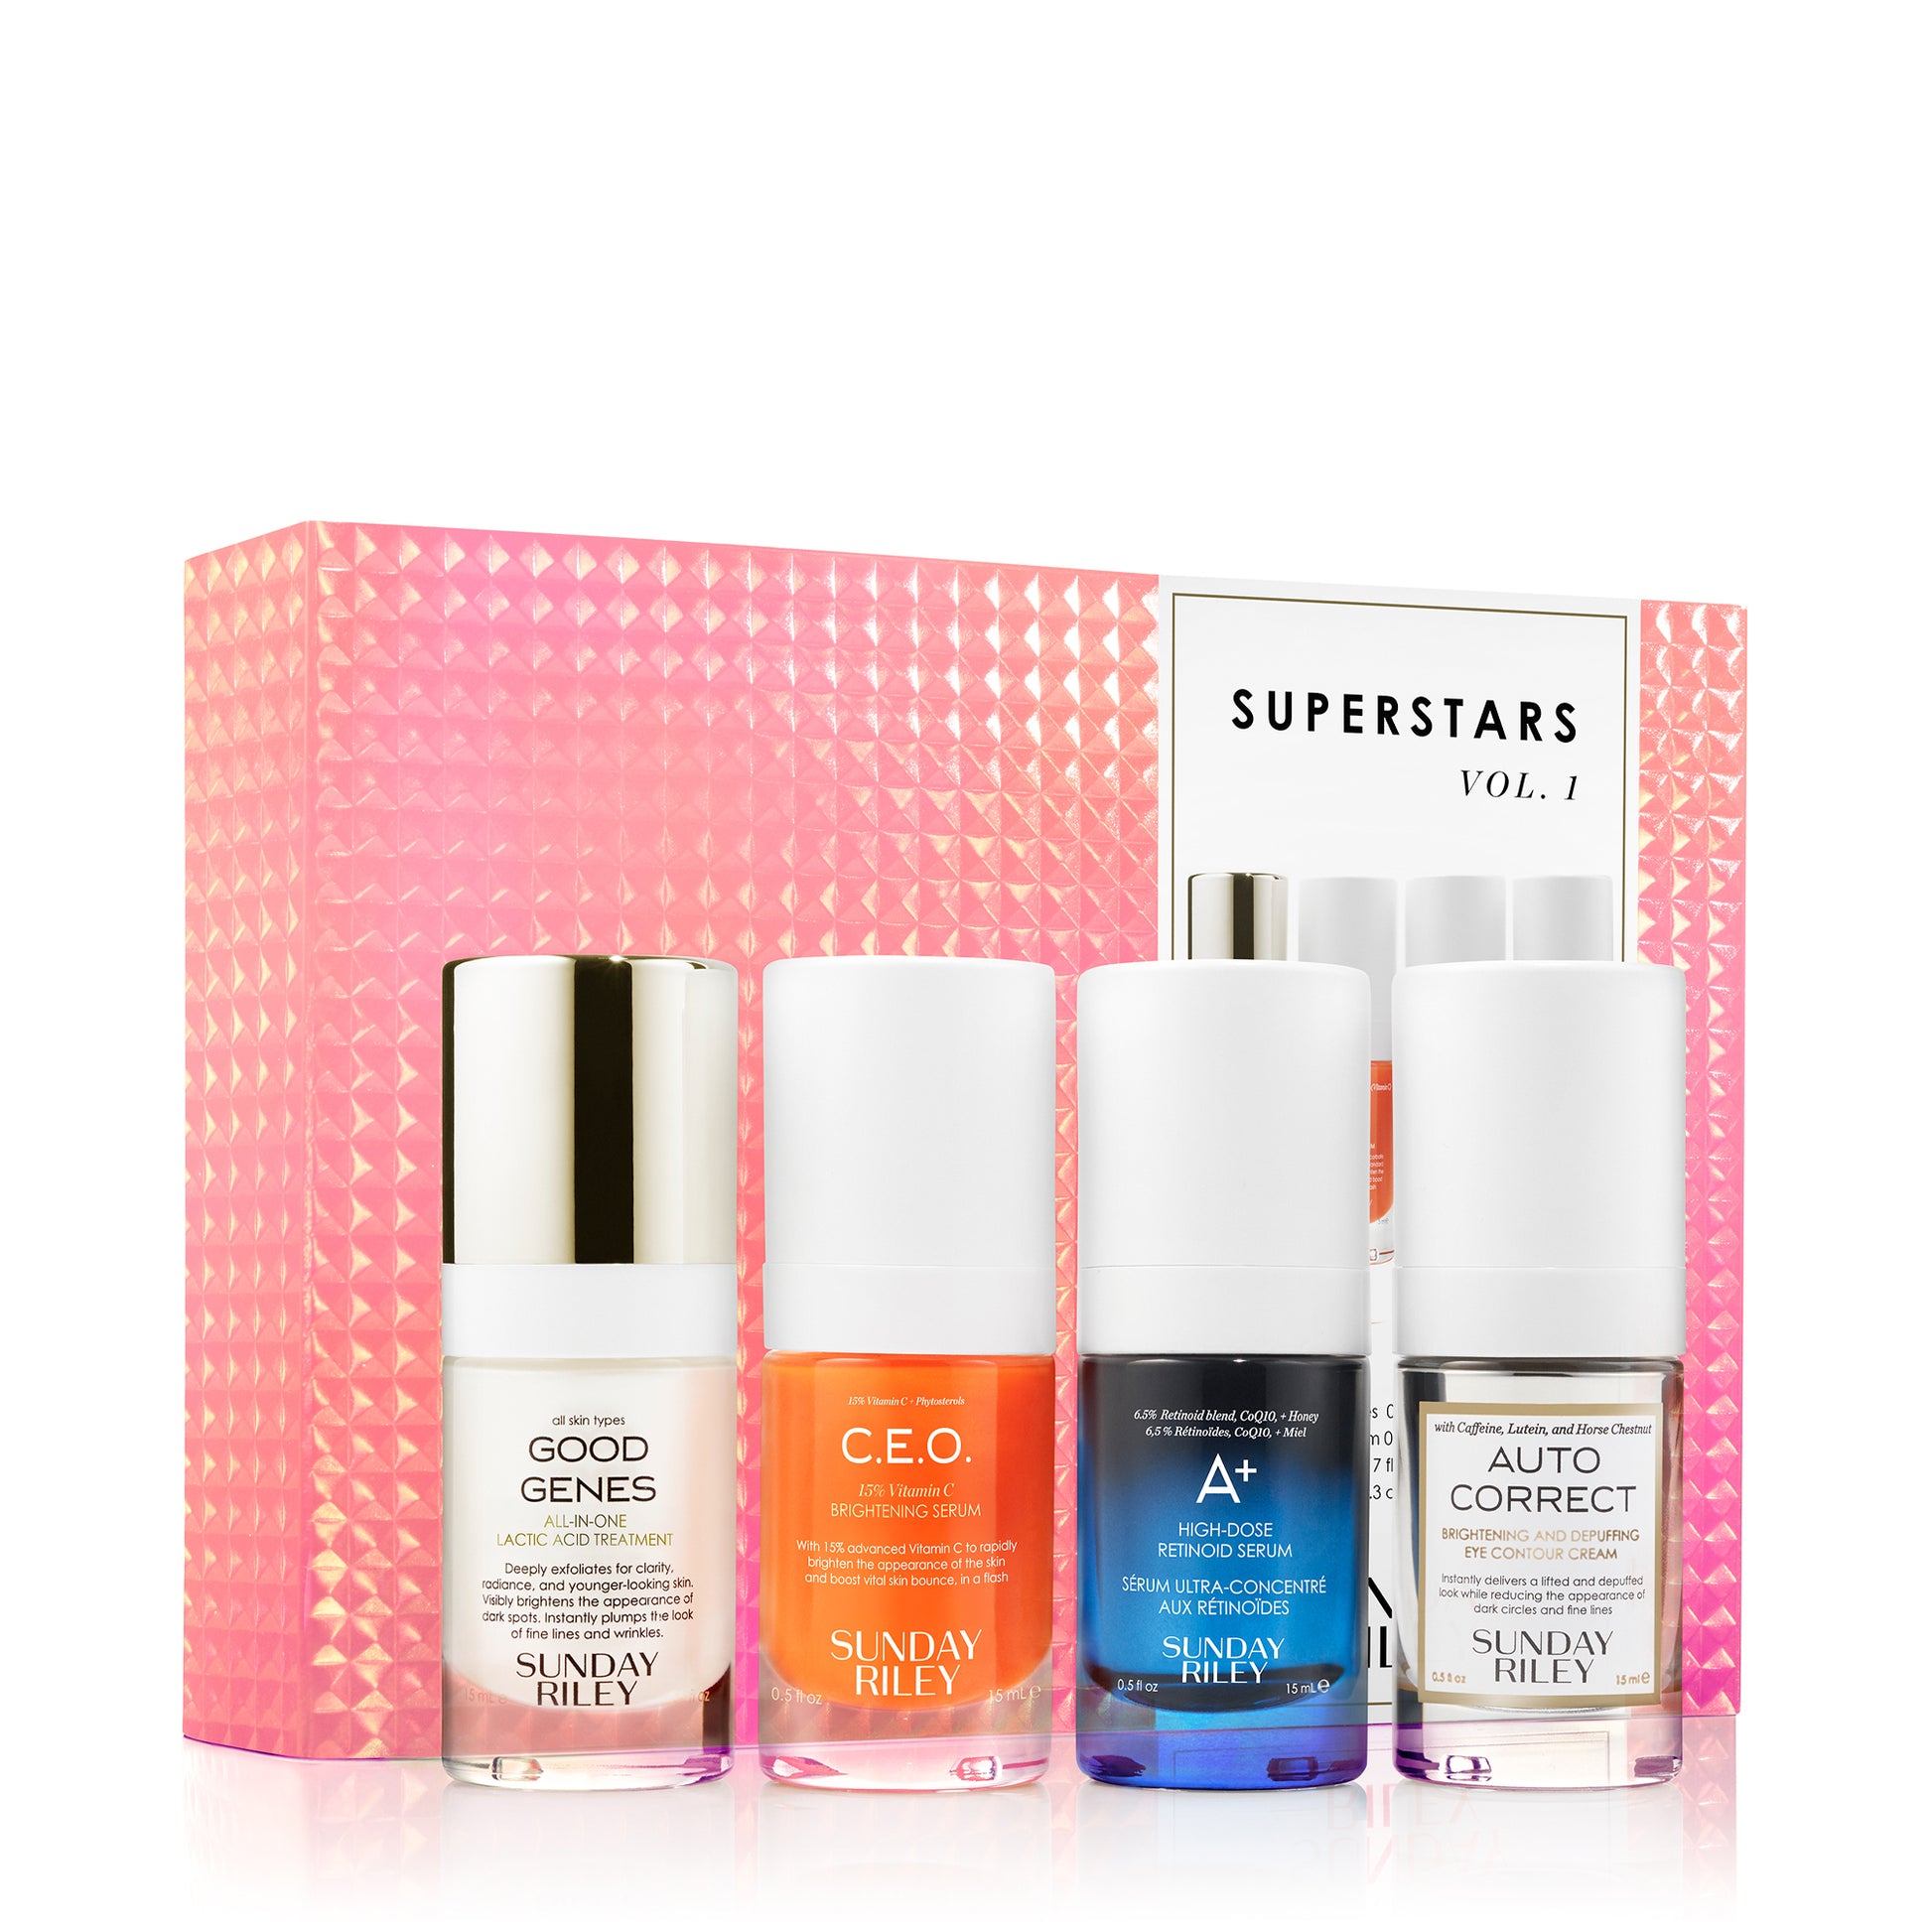 Superstars Vol.1 pack shot with Good Genes, C.E.O. Serum, A+ and Auto Correct bottles